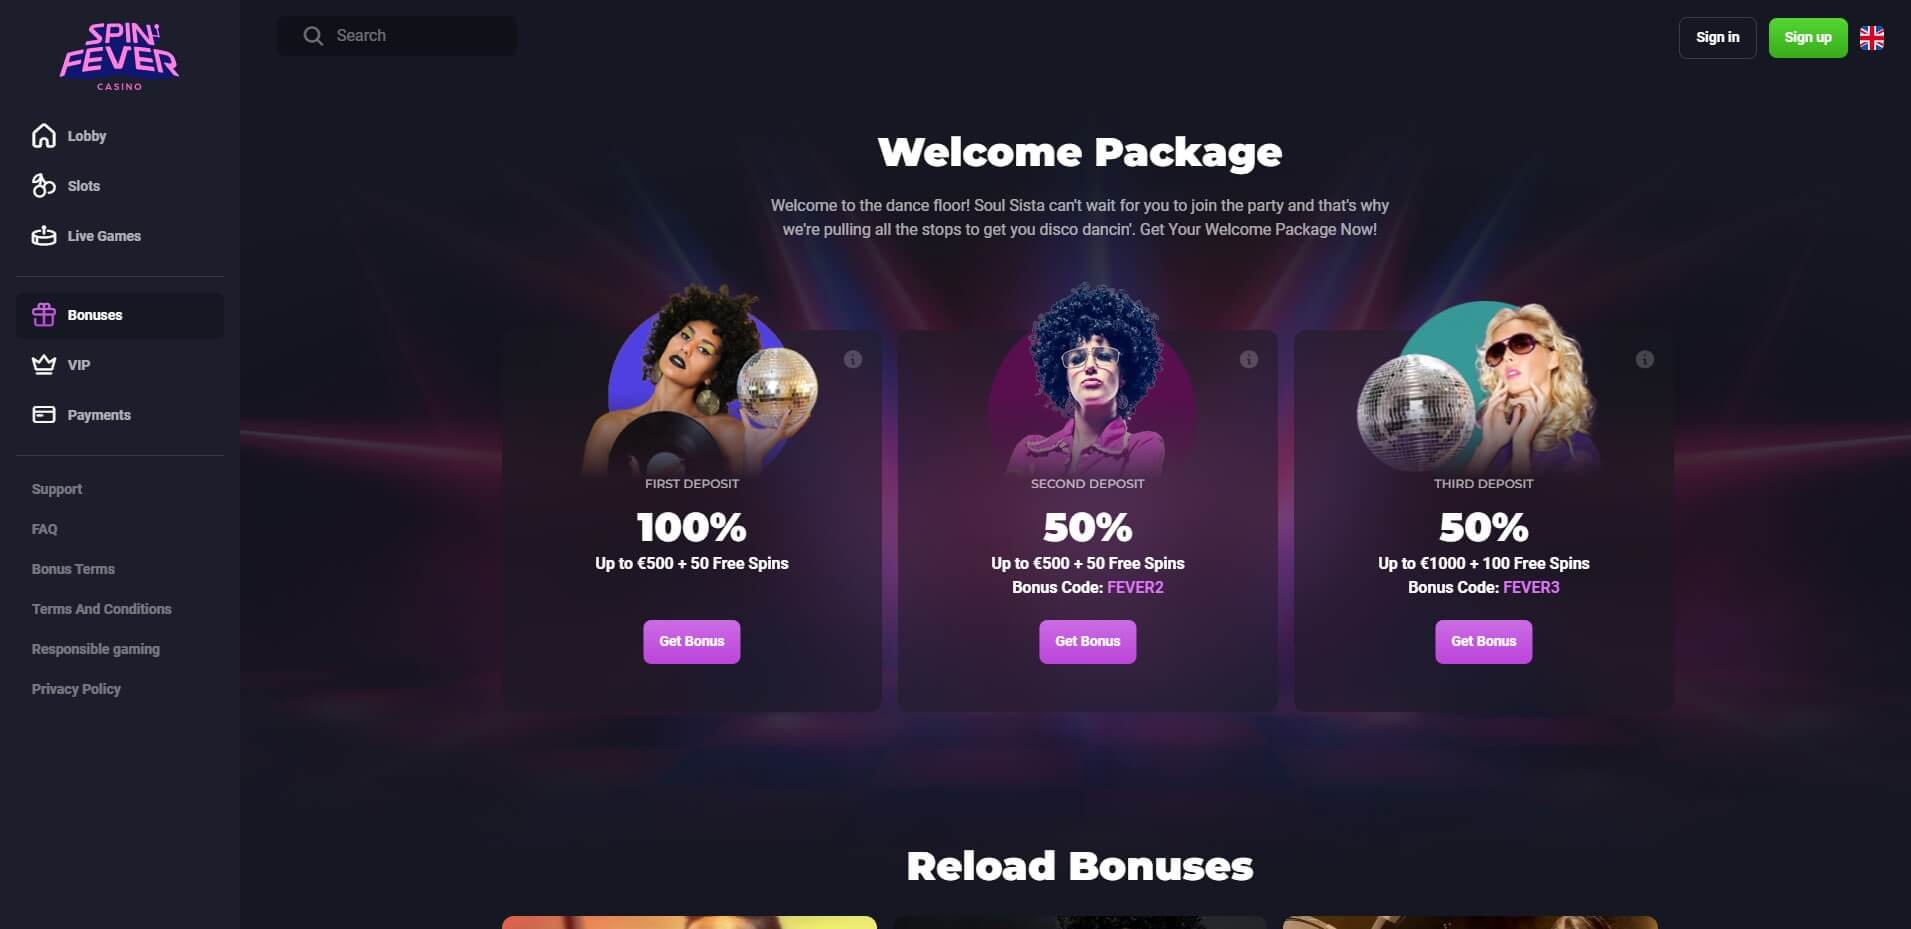 Spinfever Casino Promotions